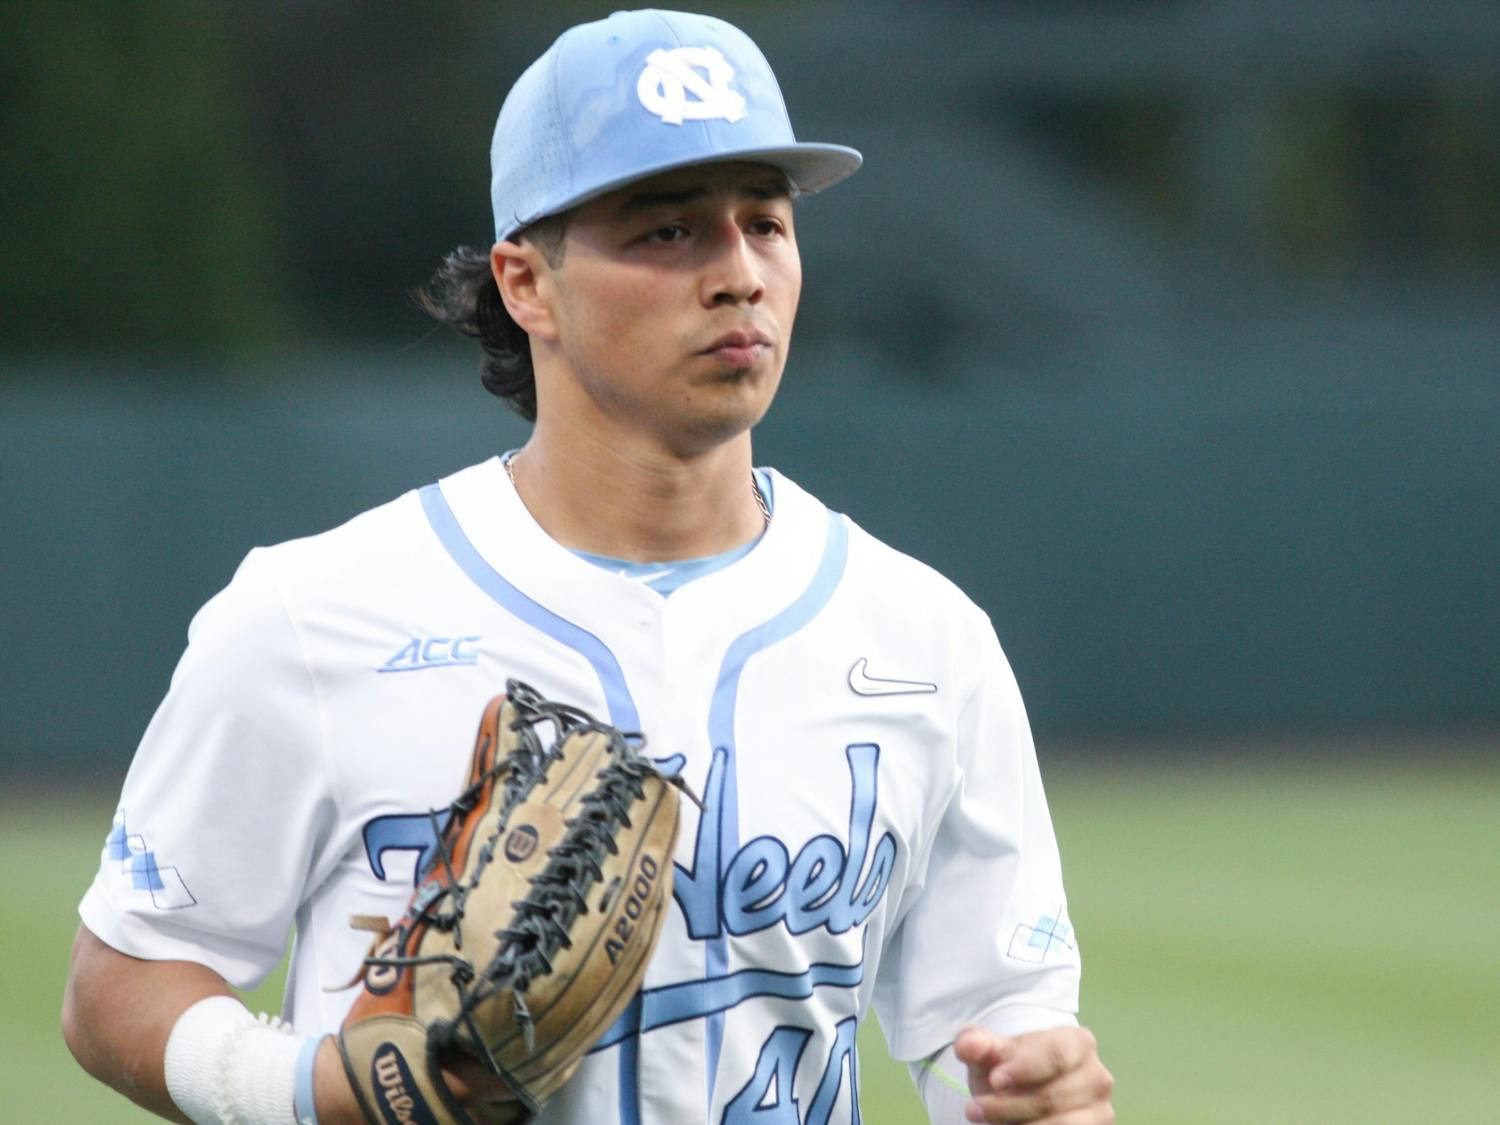 UNC junior outfielder Angel Zarate (40) returns to the dugout during a home game at Boshamer Stadium against Appalachian State on Tuesday, March 22, 2022.